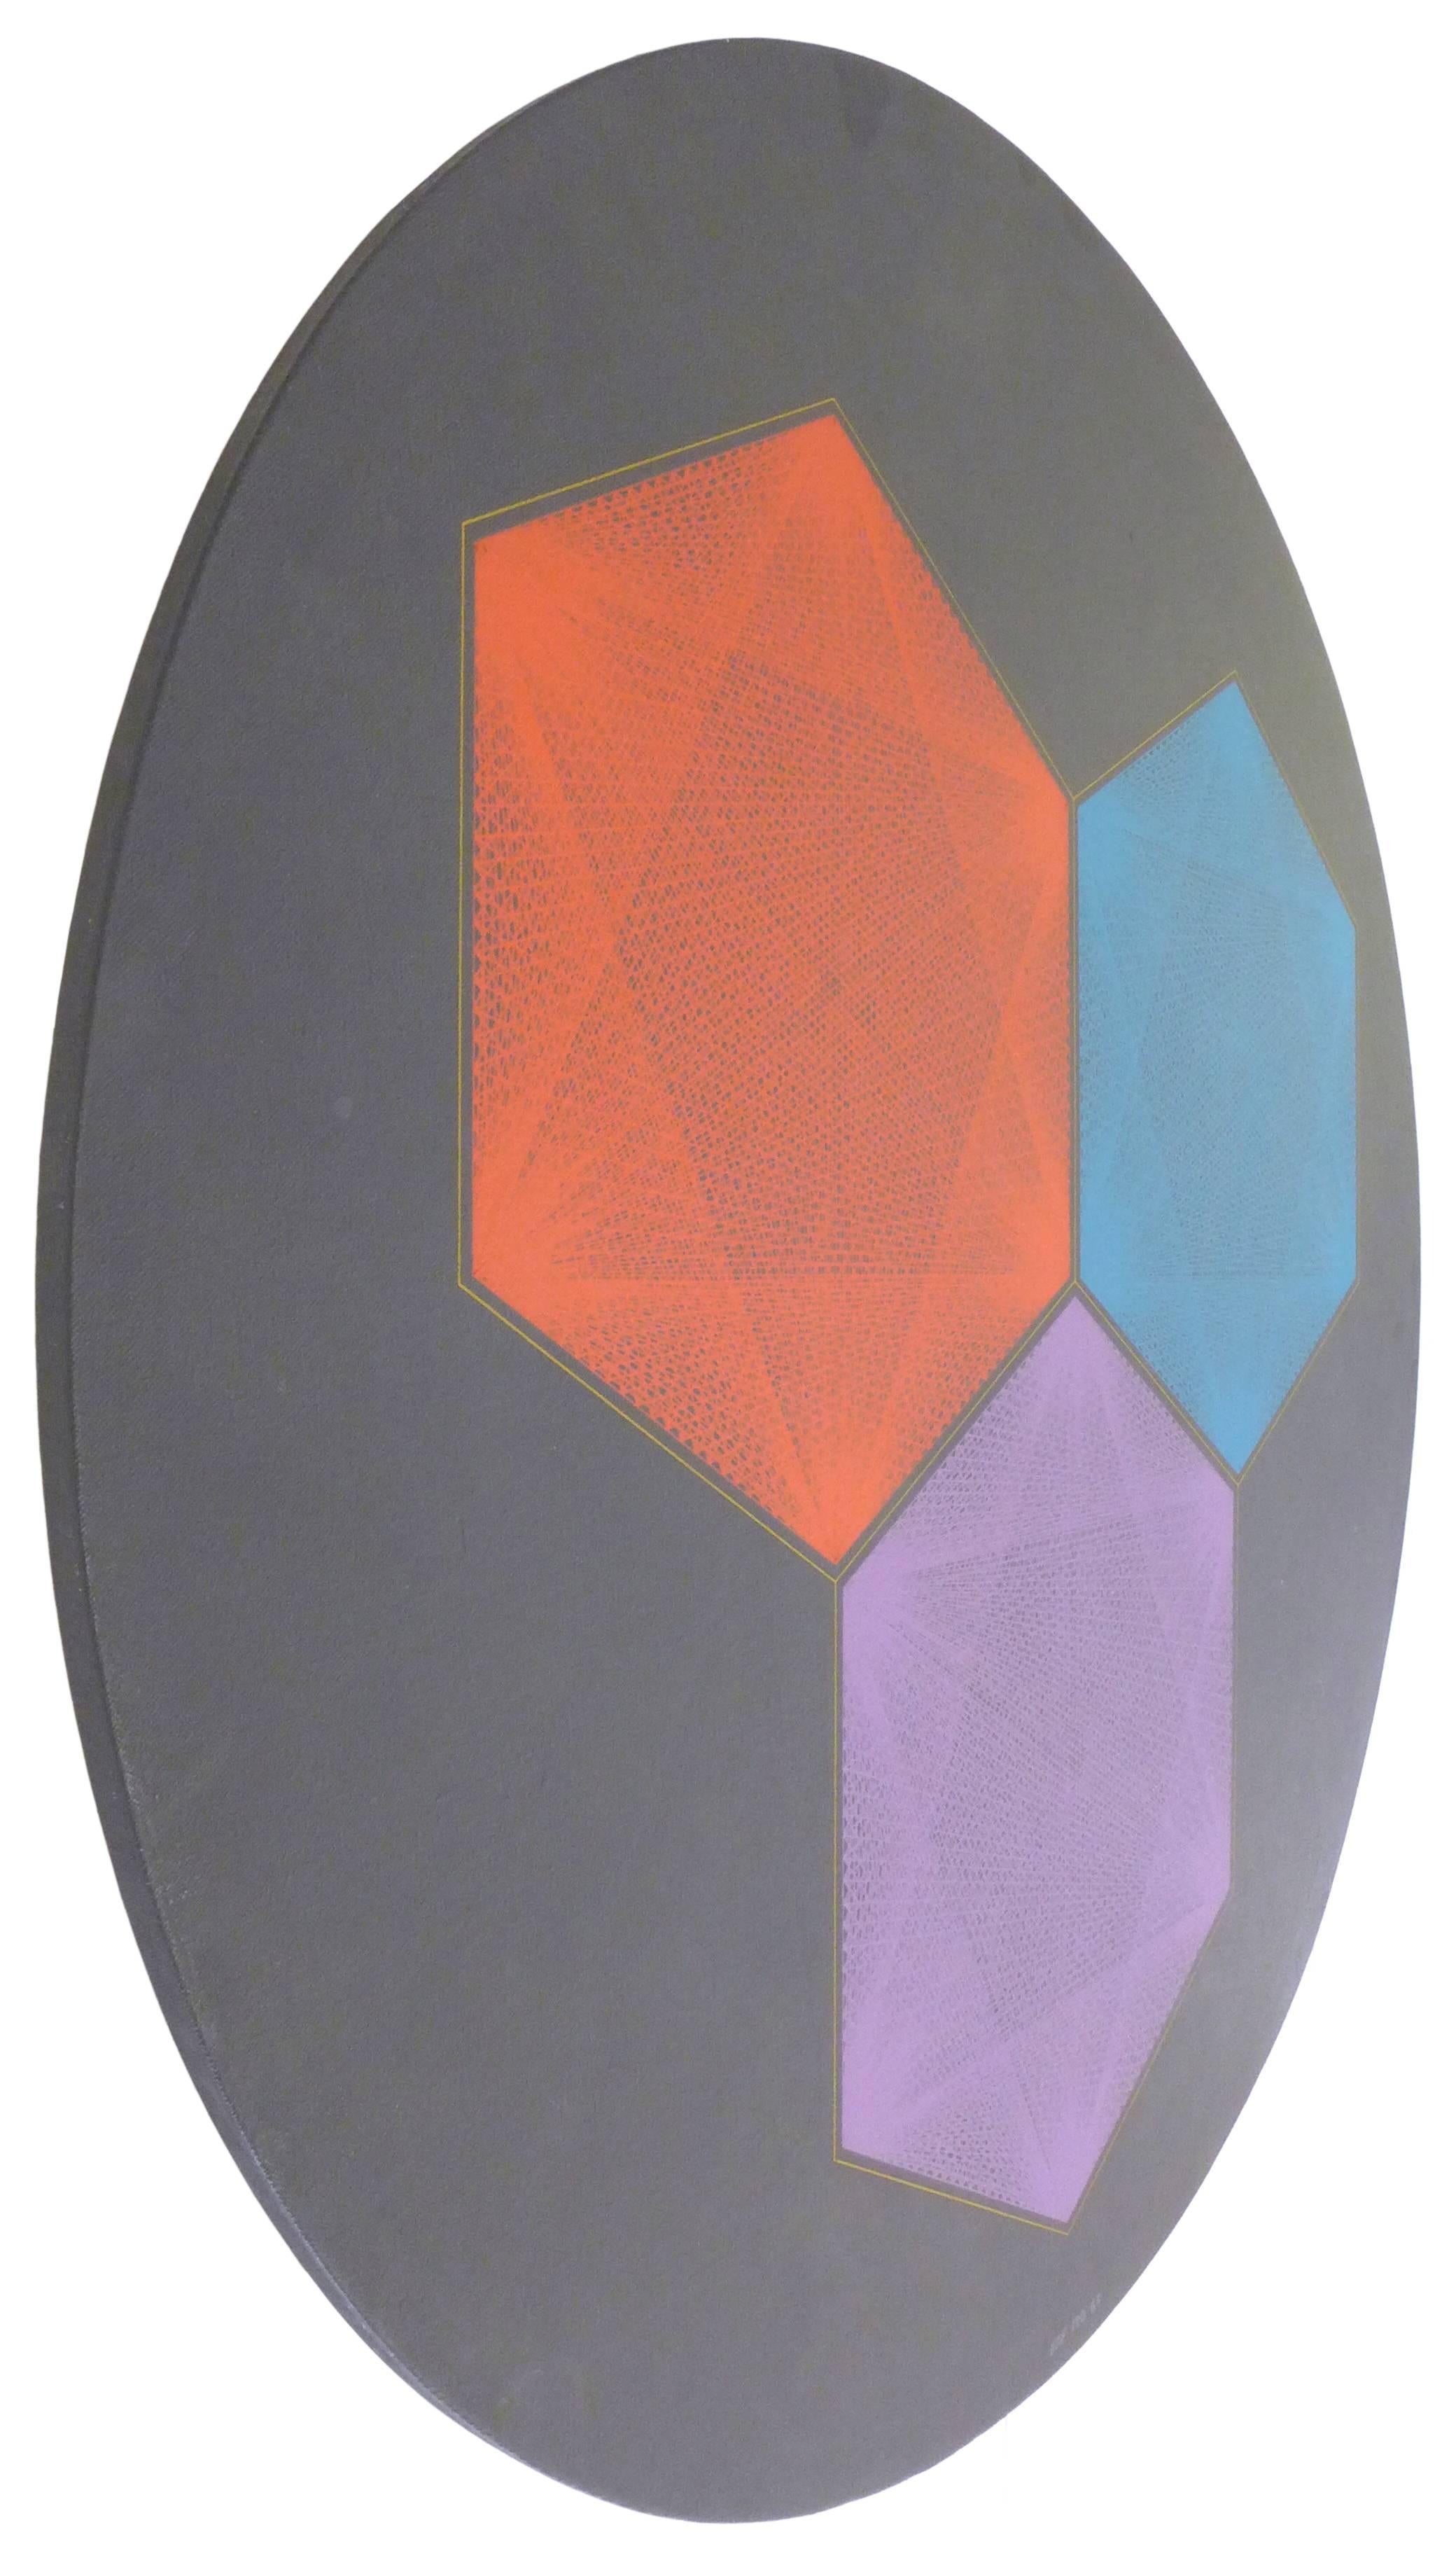 An incredible, geometric oil on canvas by California artist Ernest Noel Posey (1937 - 2007). On a sculpted, matte-black, circular canvas, a union of three gold-bordered, variously-colored hexagons each composed of a dizzying web of unbelievably